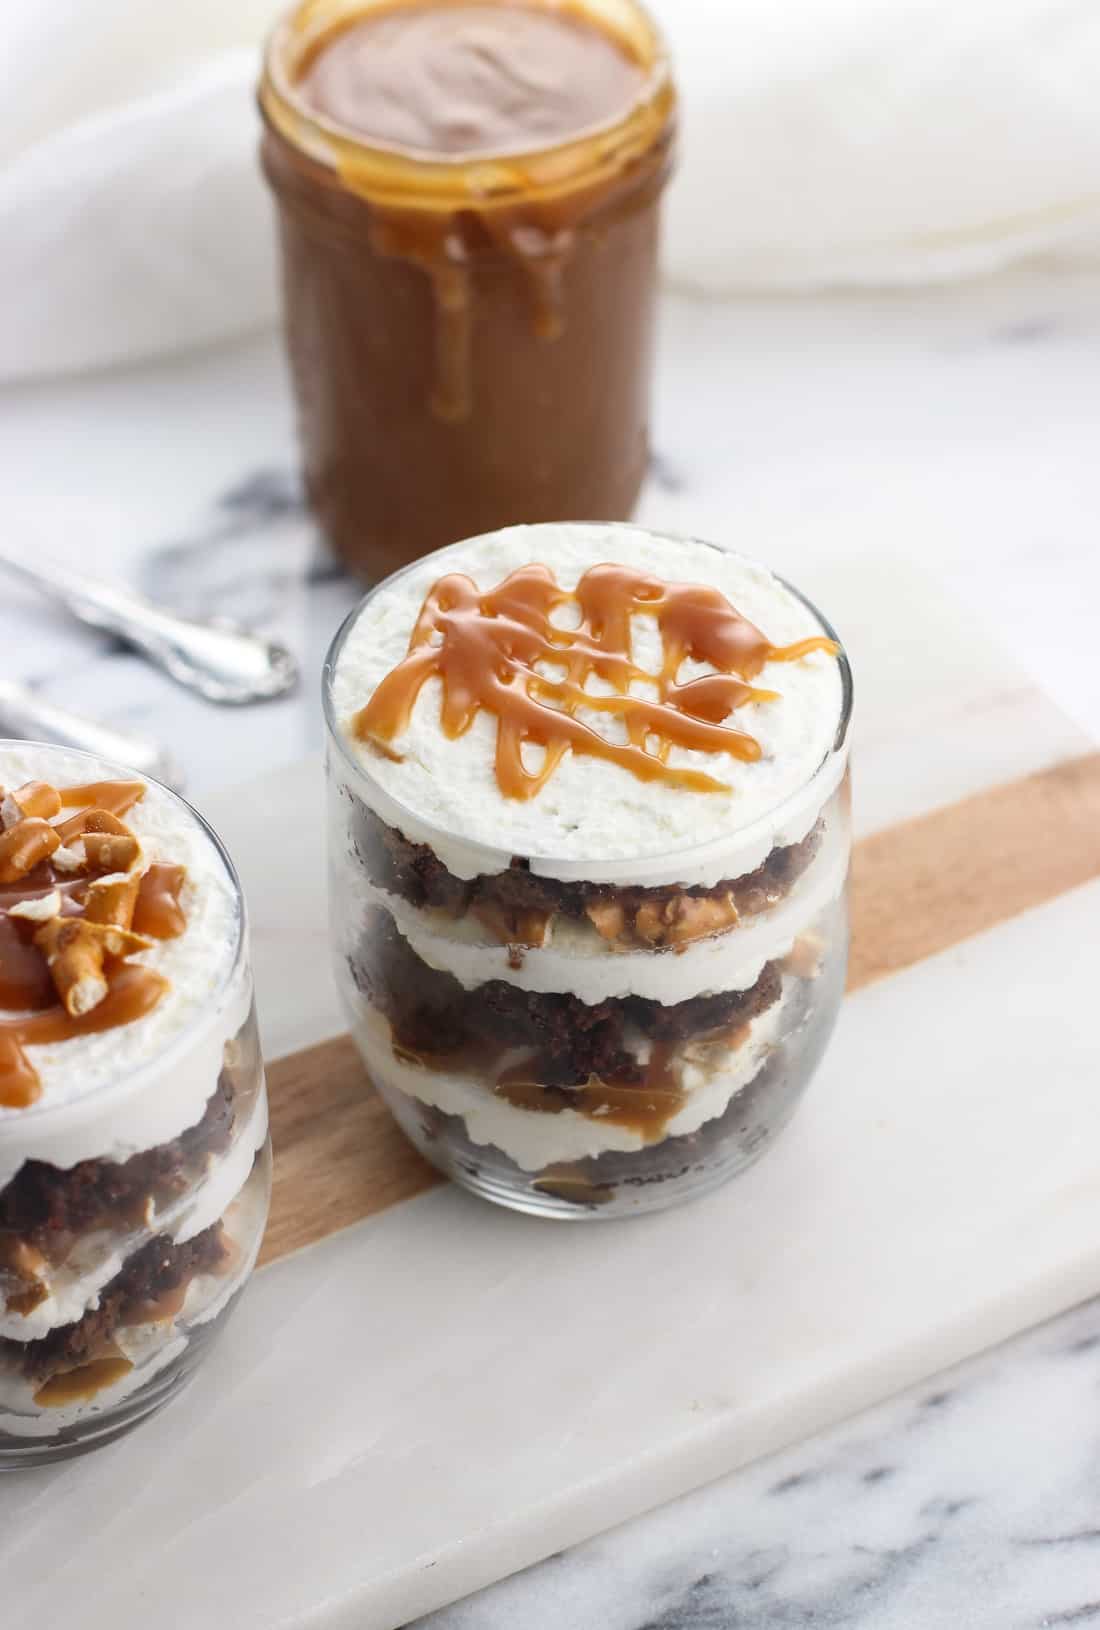 Two brownie trifles in small glasses next to a jar of caramel sauce.